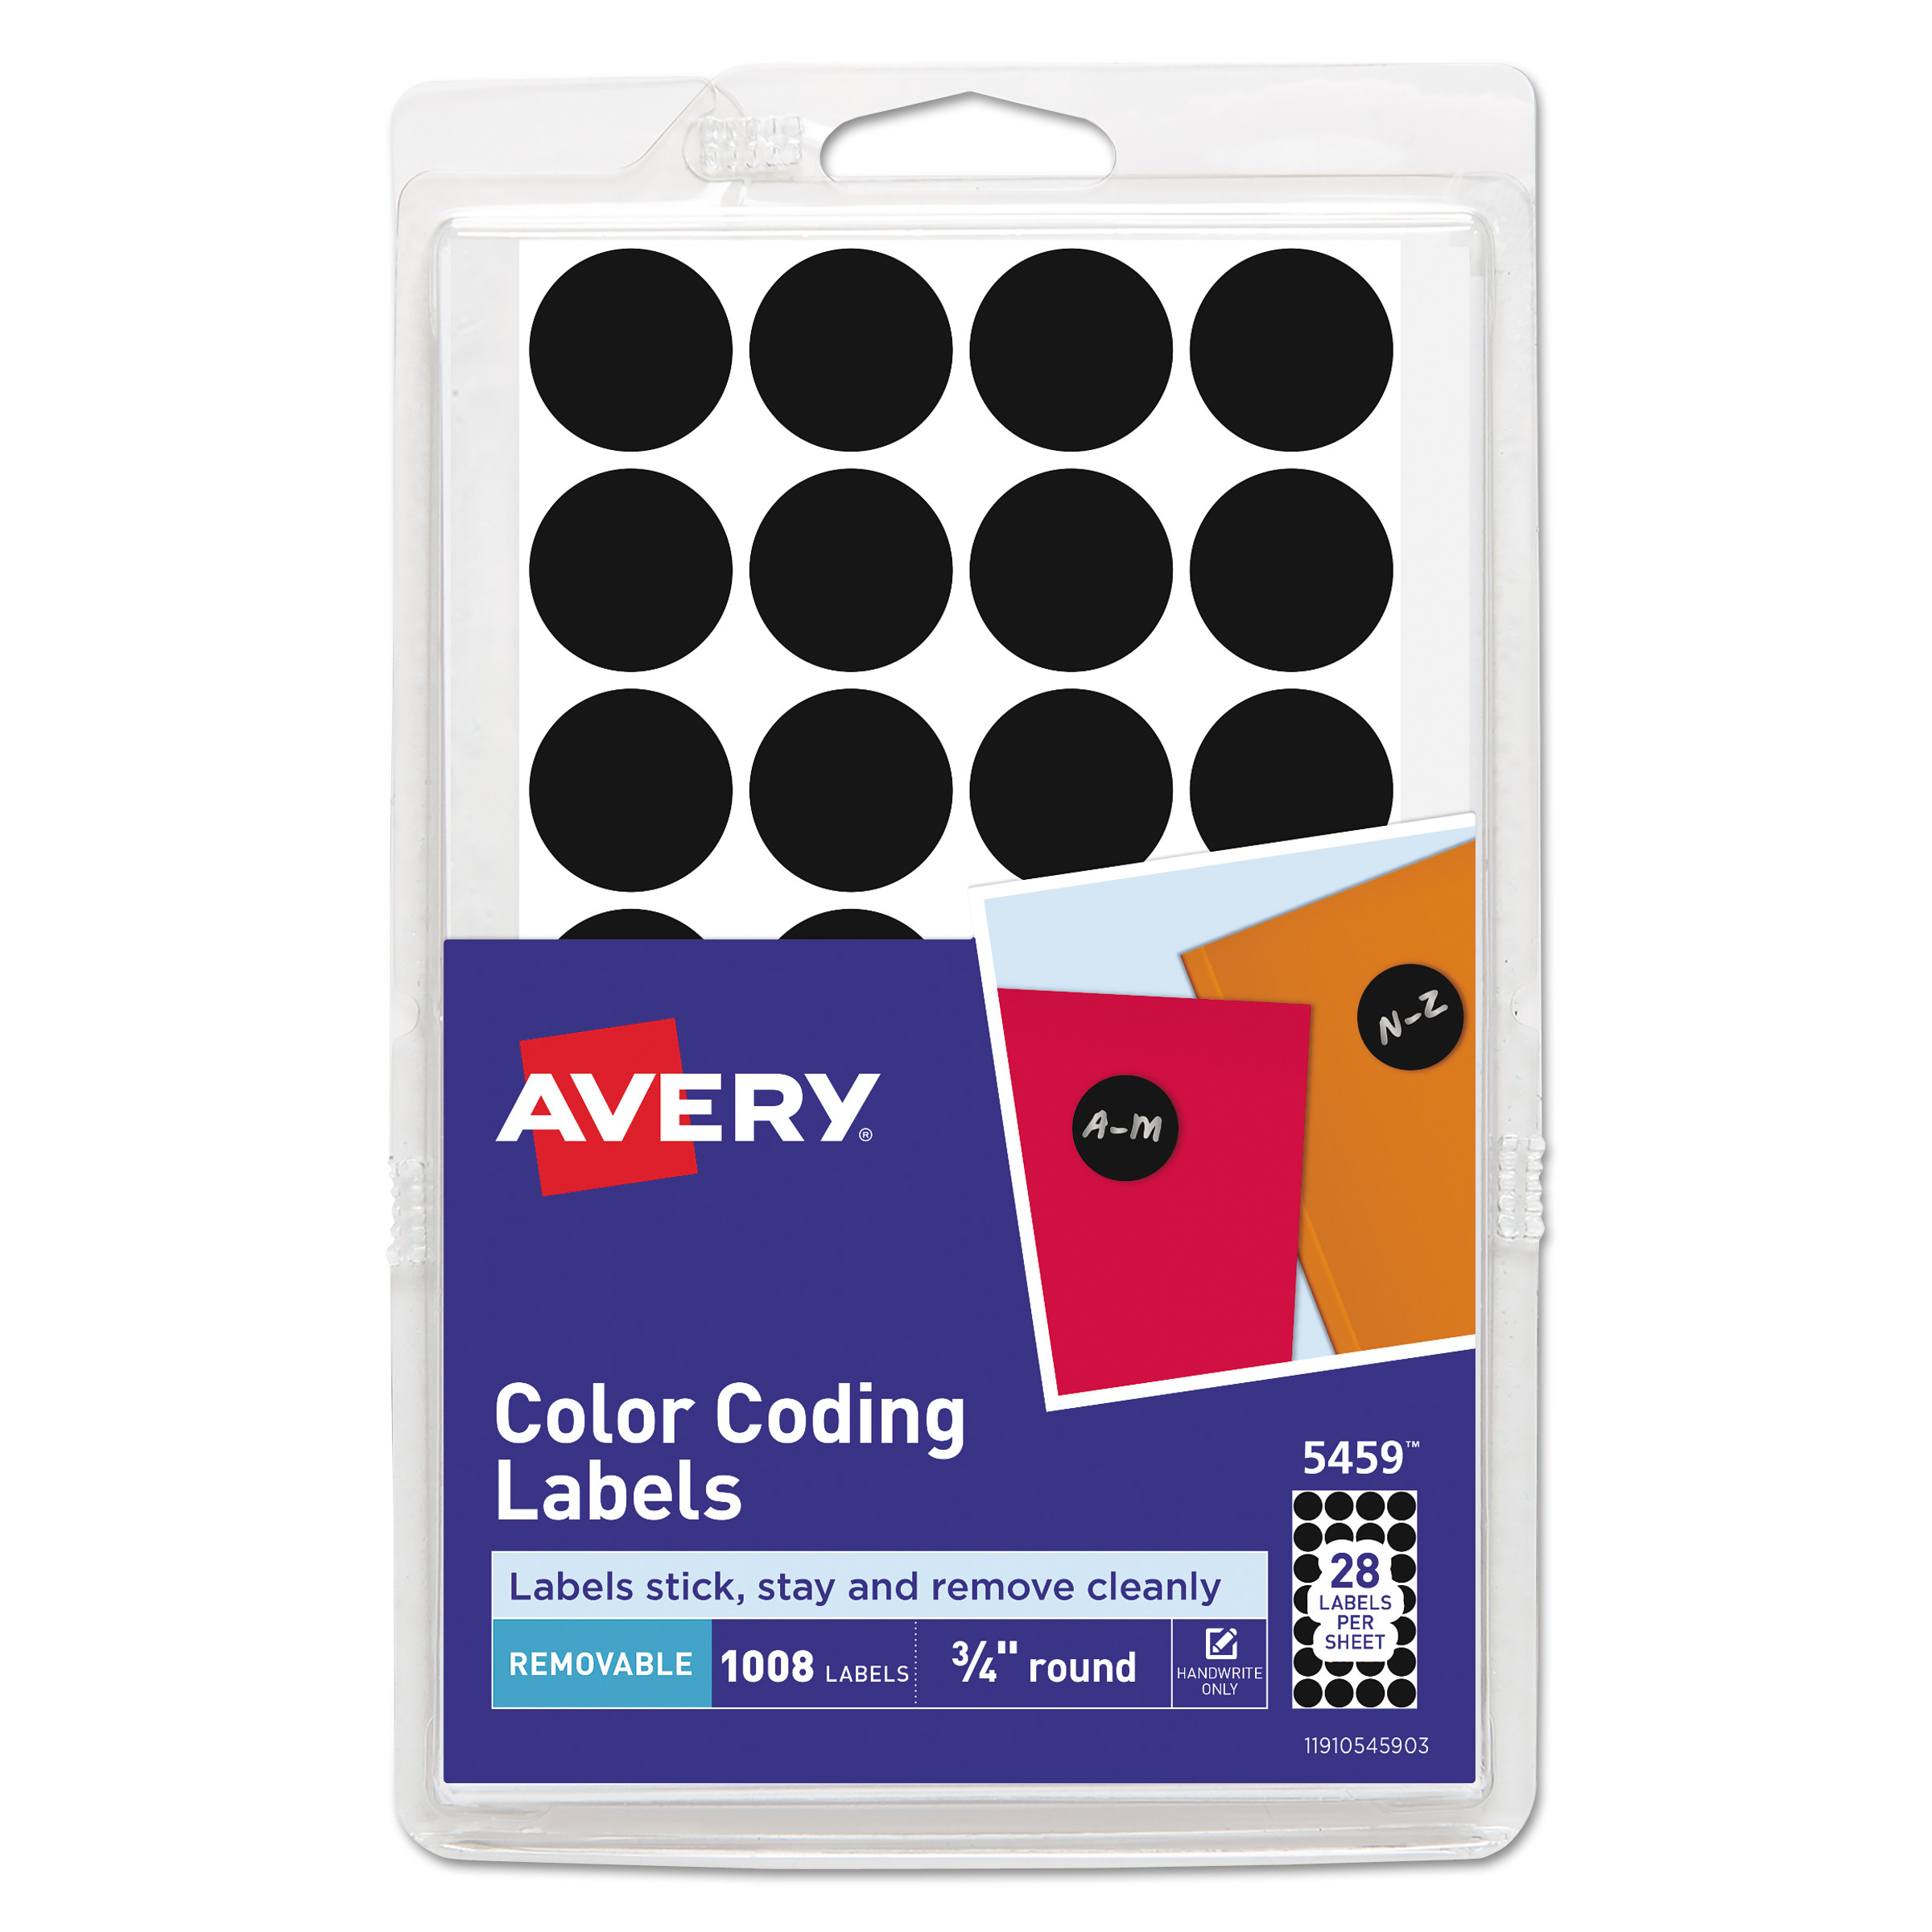  Avery 05459 Handwrite Only Self-Adhesive Removable Round Color-Coding Labels, 0.75 dia., Black, 28/Sheet, 36 Sheets/Pack (AVE05459) 